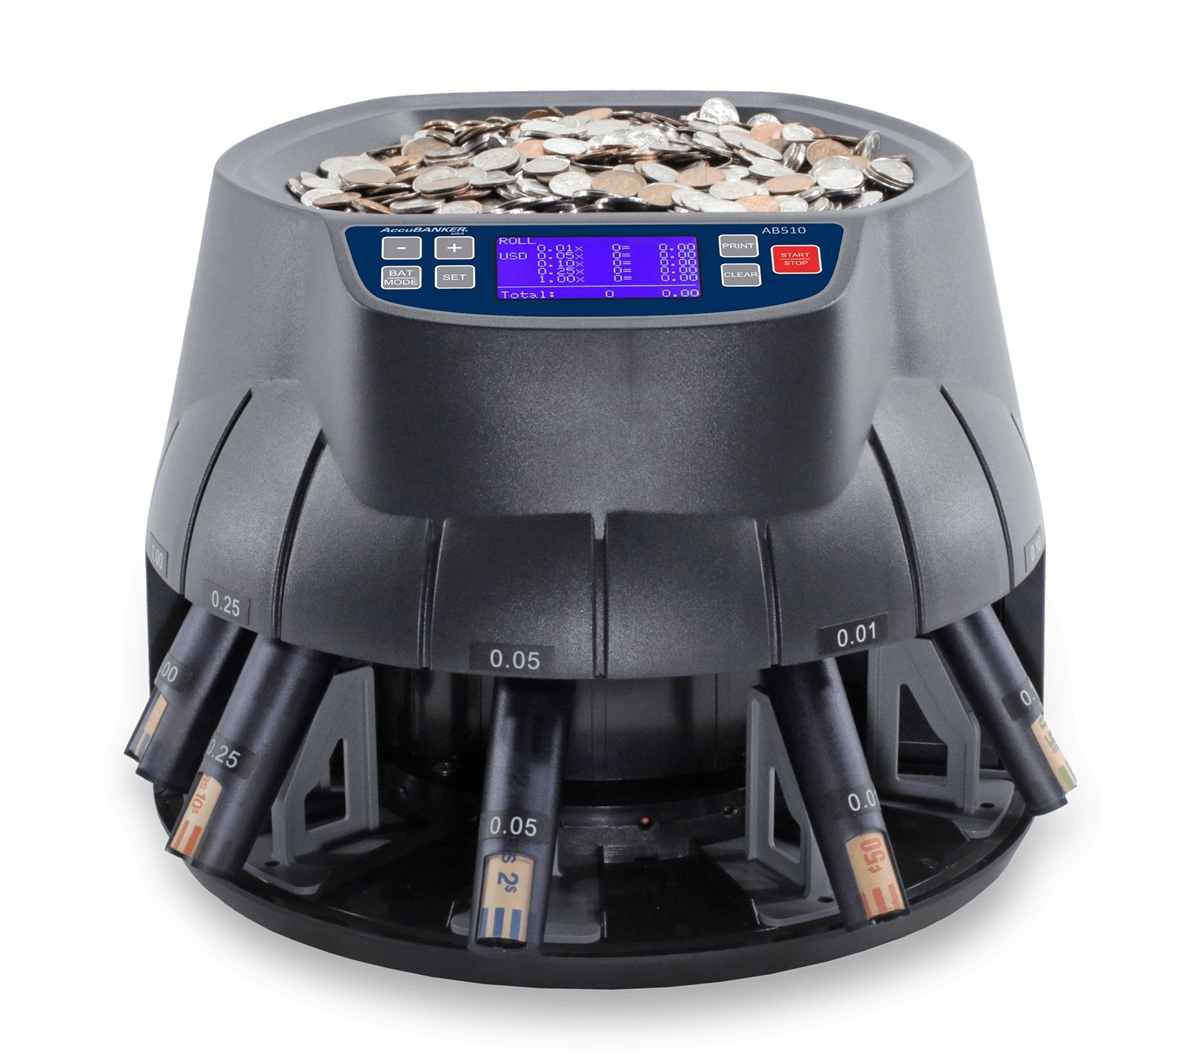 AccuBanker AB510 - Sort & Wrap Coin Counter - $234.95 | Free Shipping